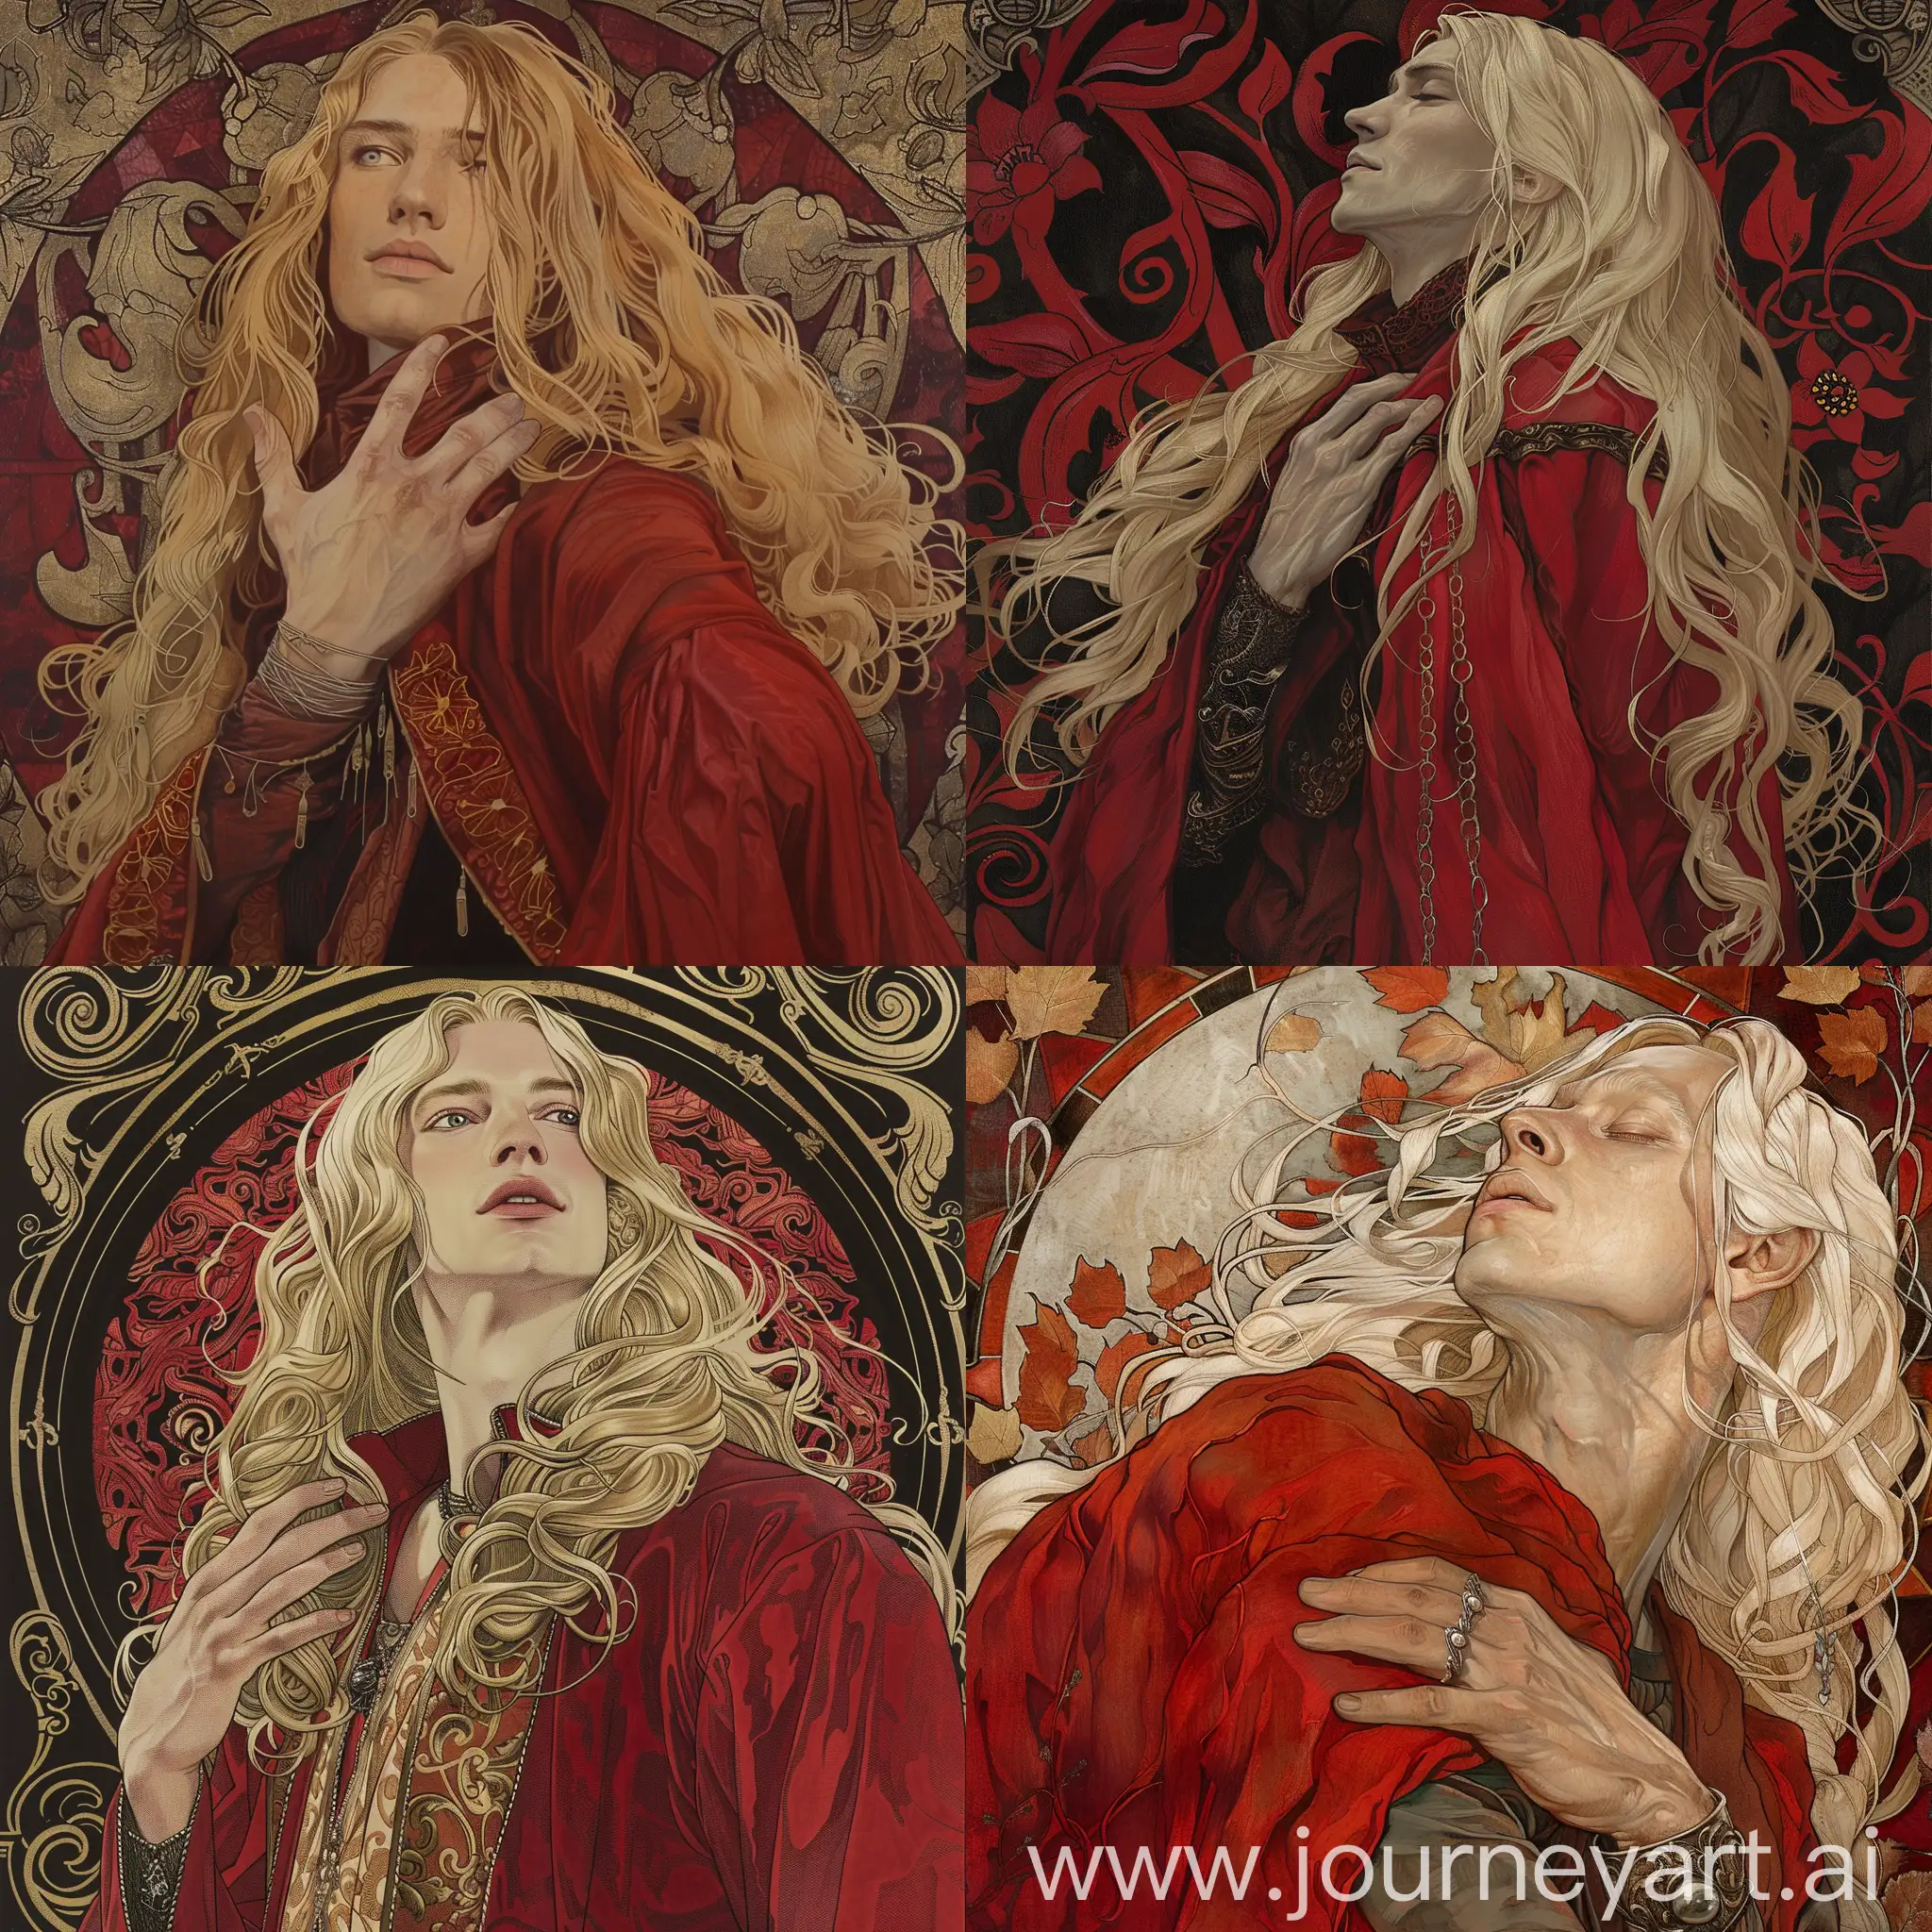 Man-with-Long-Blonde-Hair-in-Red-Mantle-and-Silver-Hand-Art-Nouveau-Portrait